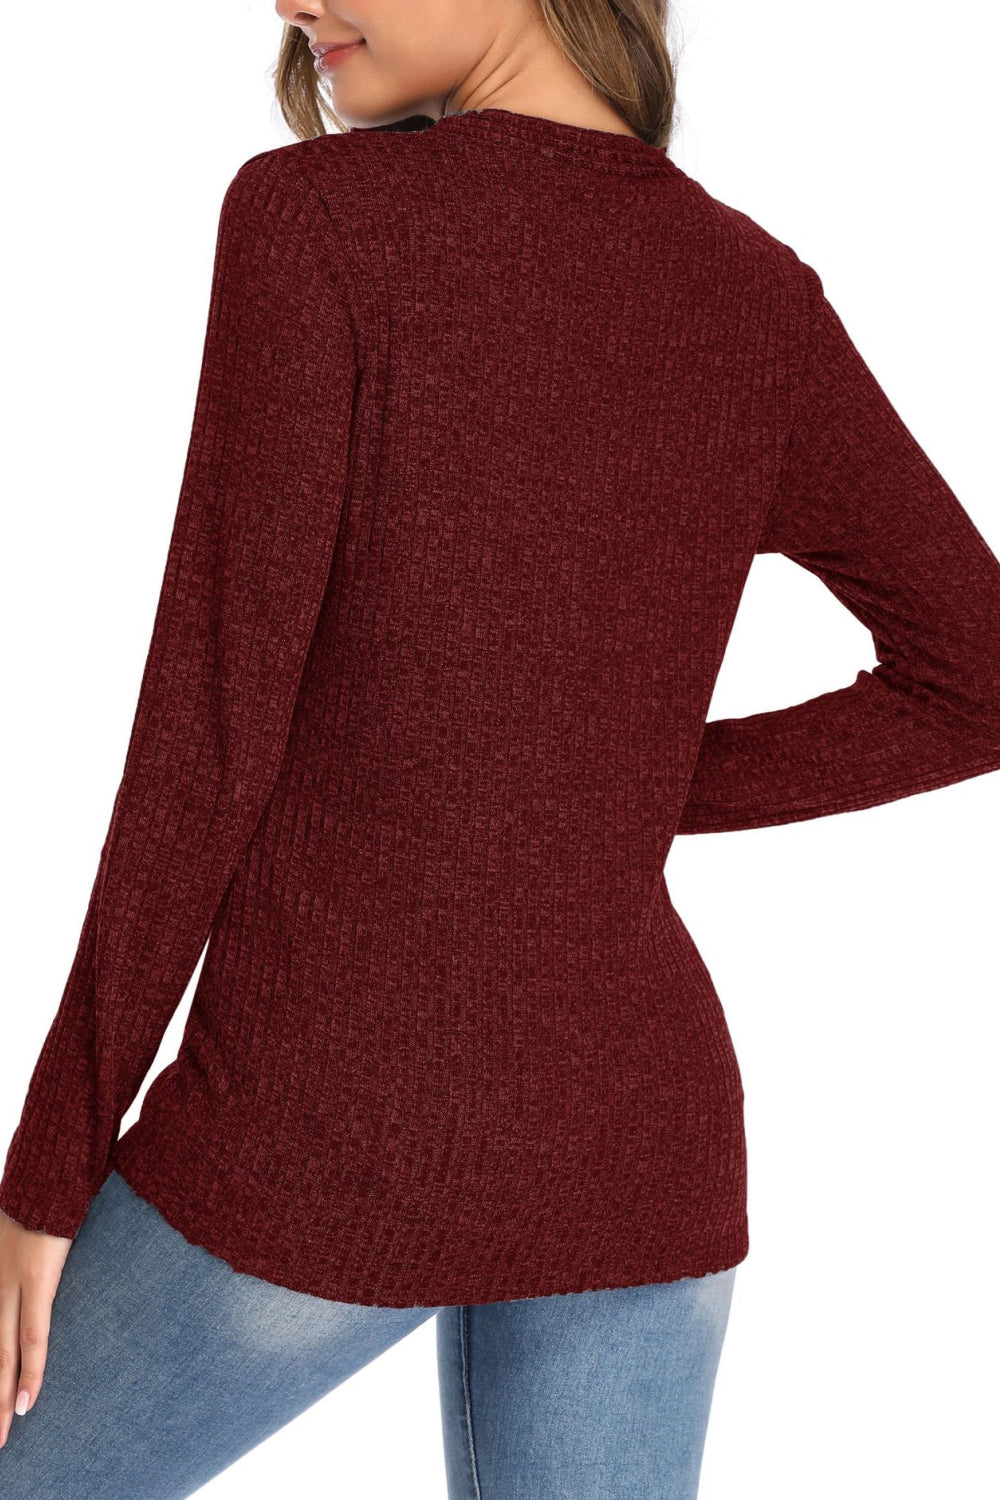 Women V-neck button long-sleeved Slim Knitted Sweater Pullover